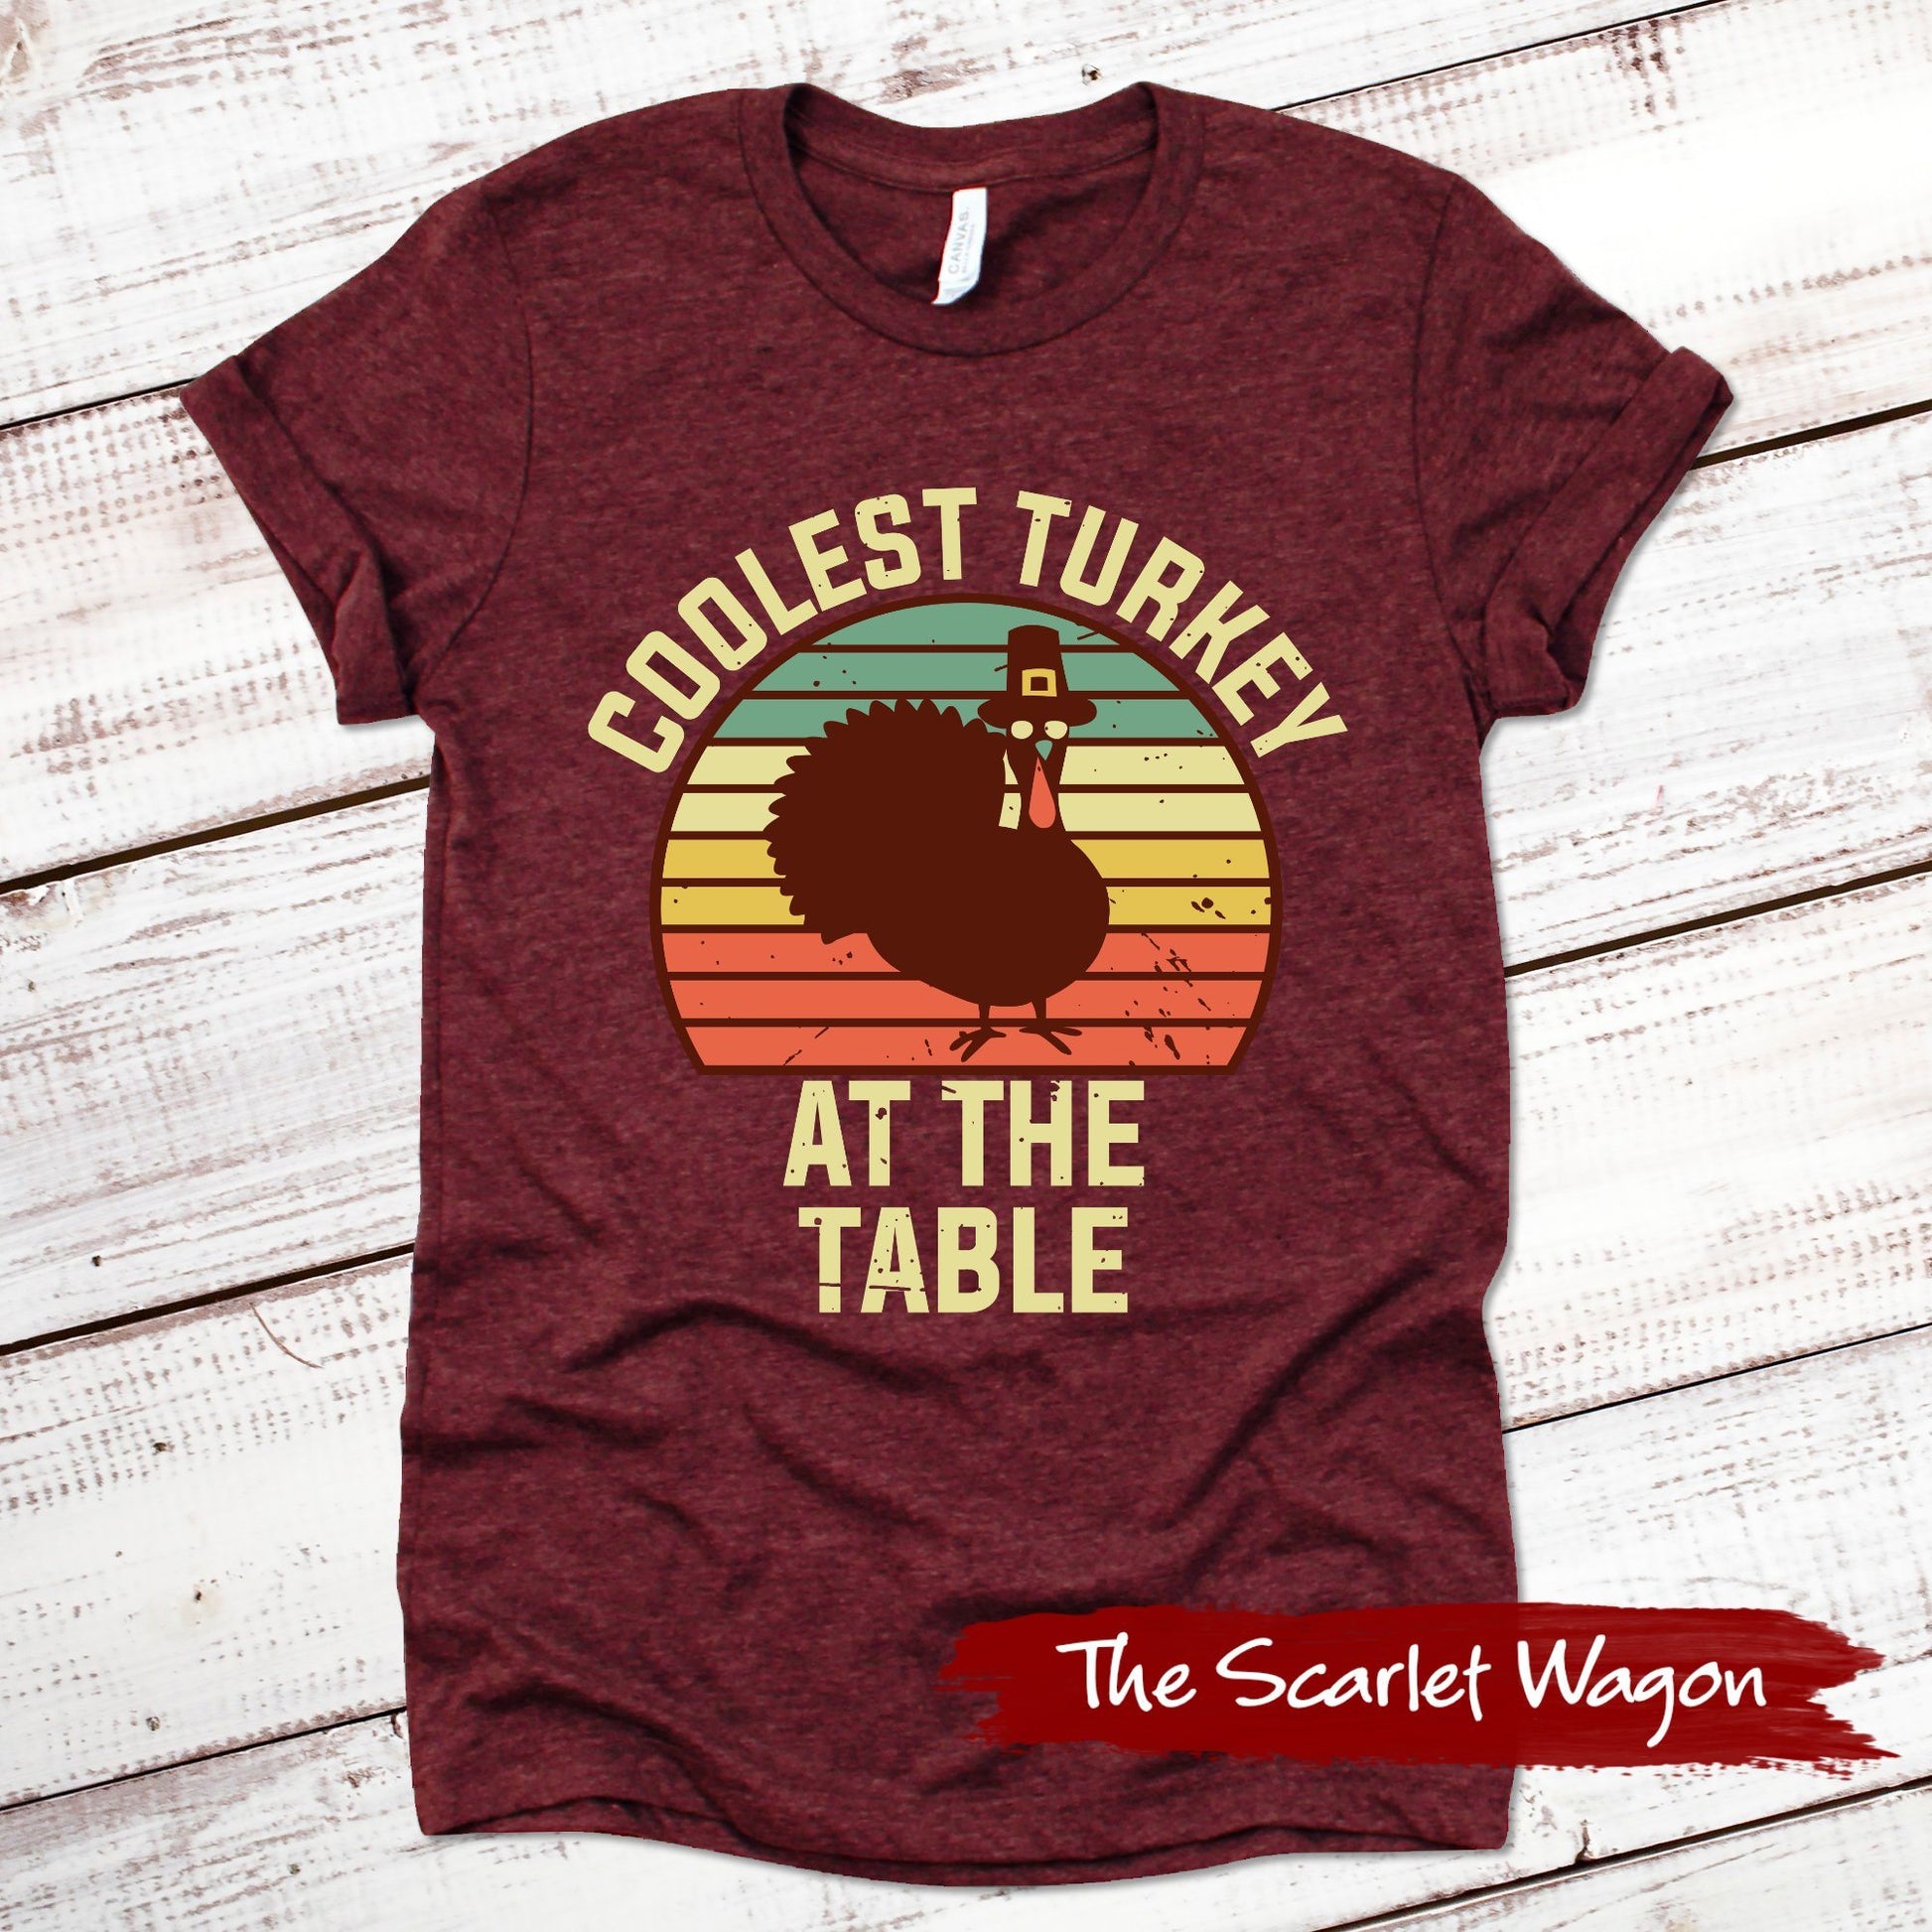 Coolest Turkey at the Table Fall Shirts Scarlet Wagon Heather Cardinal XS 